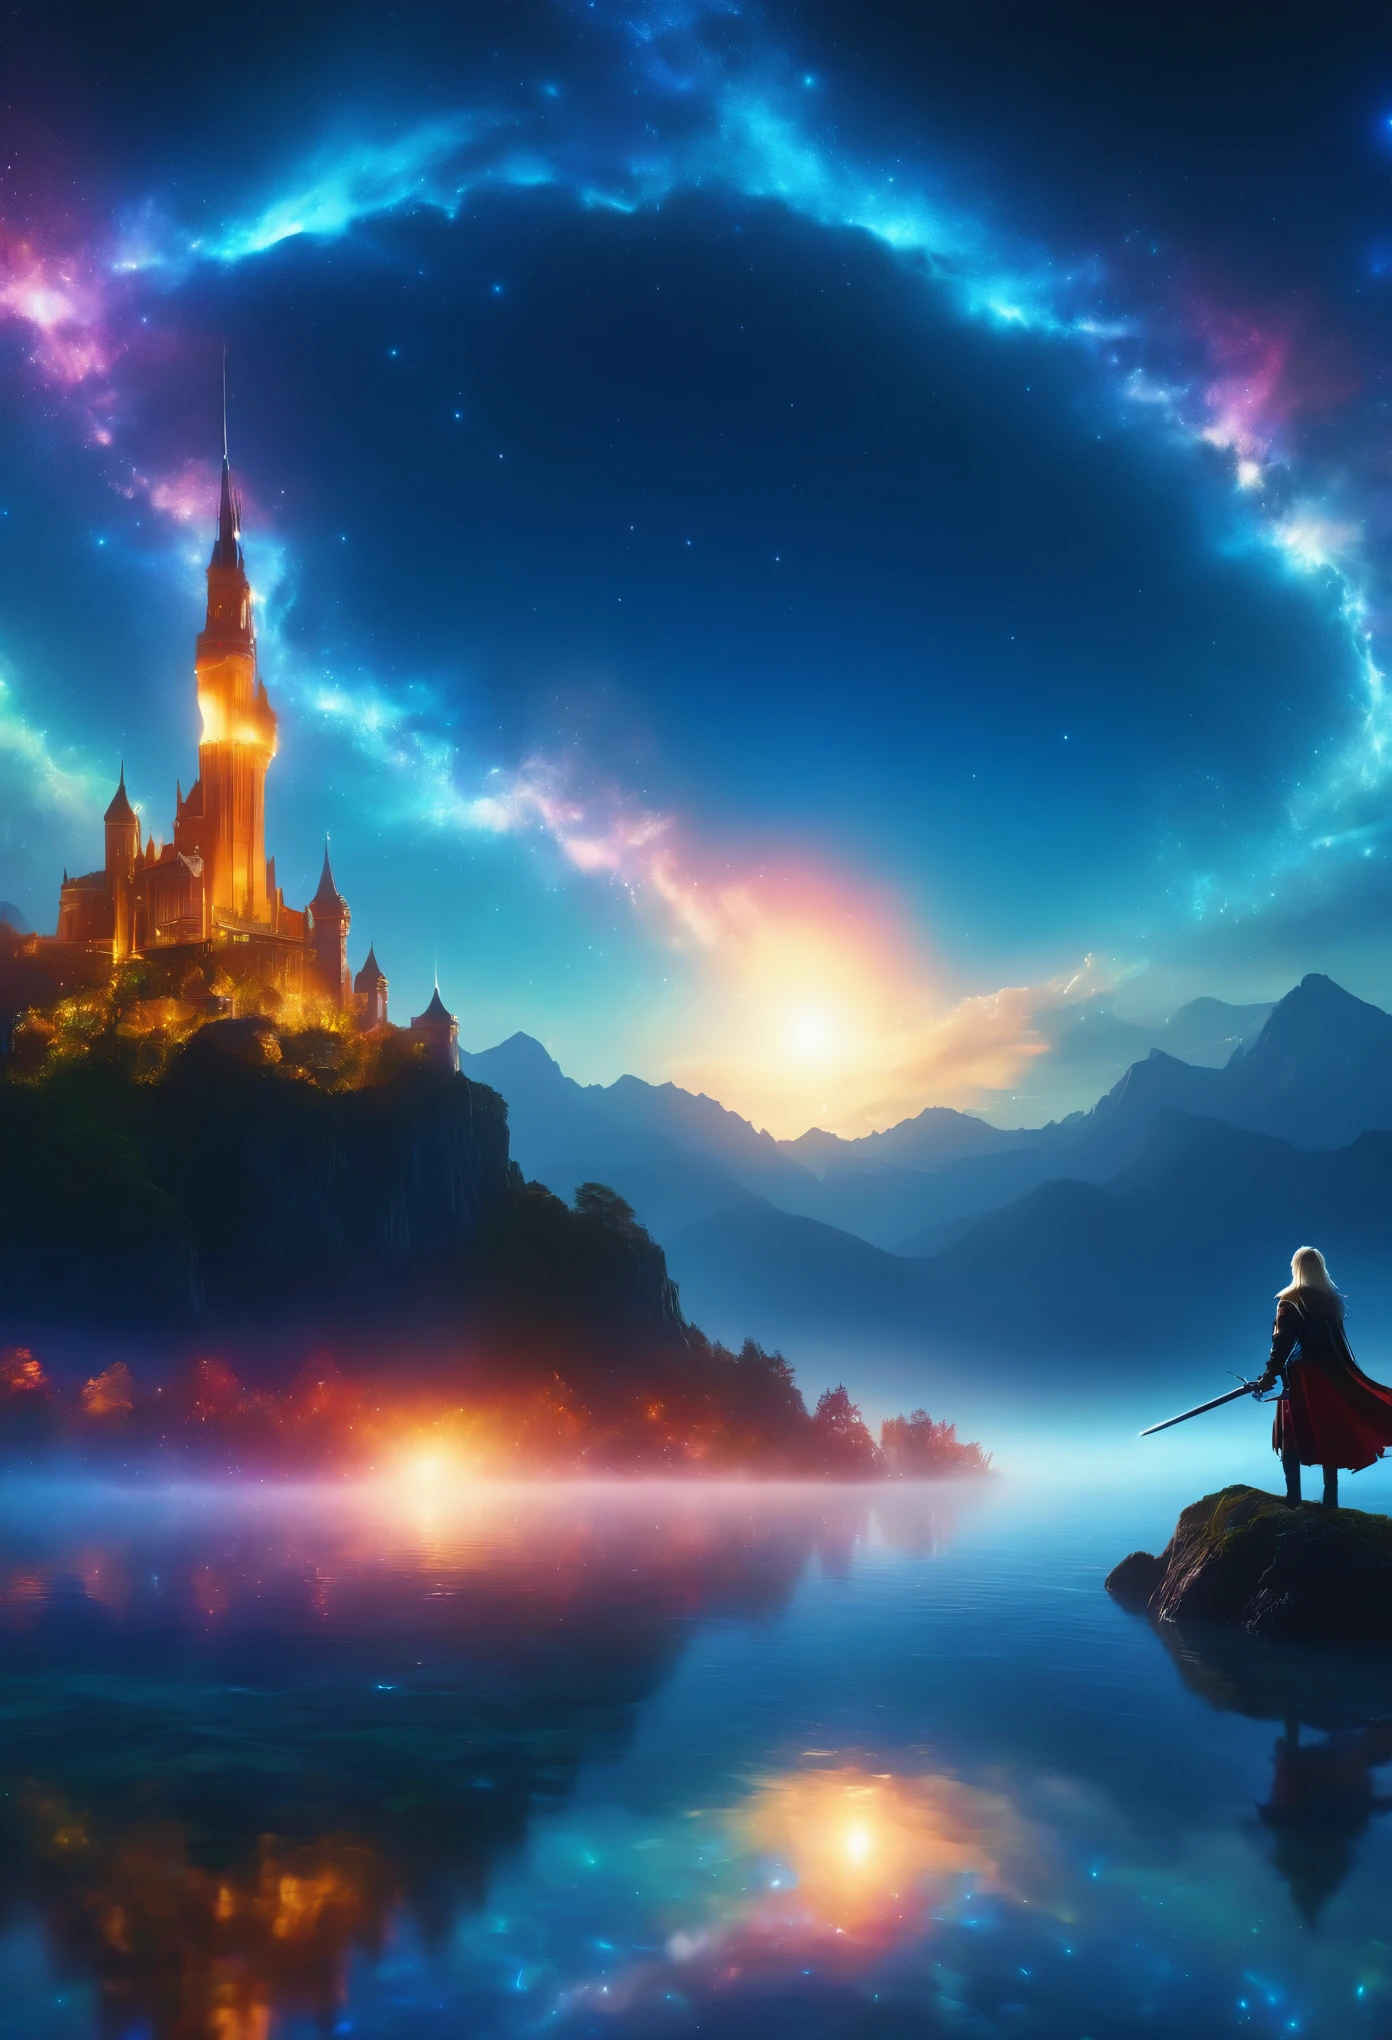 (8K, highest quality, masterpiece, final fantasy style: 1.2), (unrealistic, photorealistic: 1.37), (one mage lady standing on lake side, huge bouncing bust, Cover your whole body in light, Magic Swordsman, with sword with fire, Her sword shines into the heavens:1.1), Dreamy landscape, Fantasy, Unsurreal landscapes, Super detailed, Flying medieval castle, Floating Island in the Sky, Seven-colored swirl of light, (Mr. Shooting Star.A small, shiny, long-tailed bird soaring through the sky:1.3), Aurora, Intense lightning, milky way, Complex Light, Mr.々Colored light, Large Lake, Starry sky reflected on the lake surface, Countless shining stars, Meteors, Many meteors, Aura of, (A pillar of light emanated from the ground:1,2), Complex SentencesMr.Magic Circle,